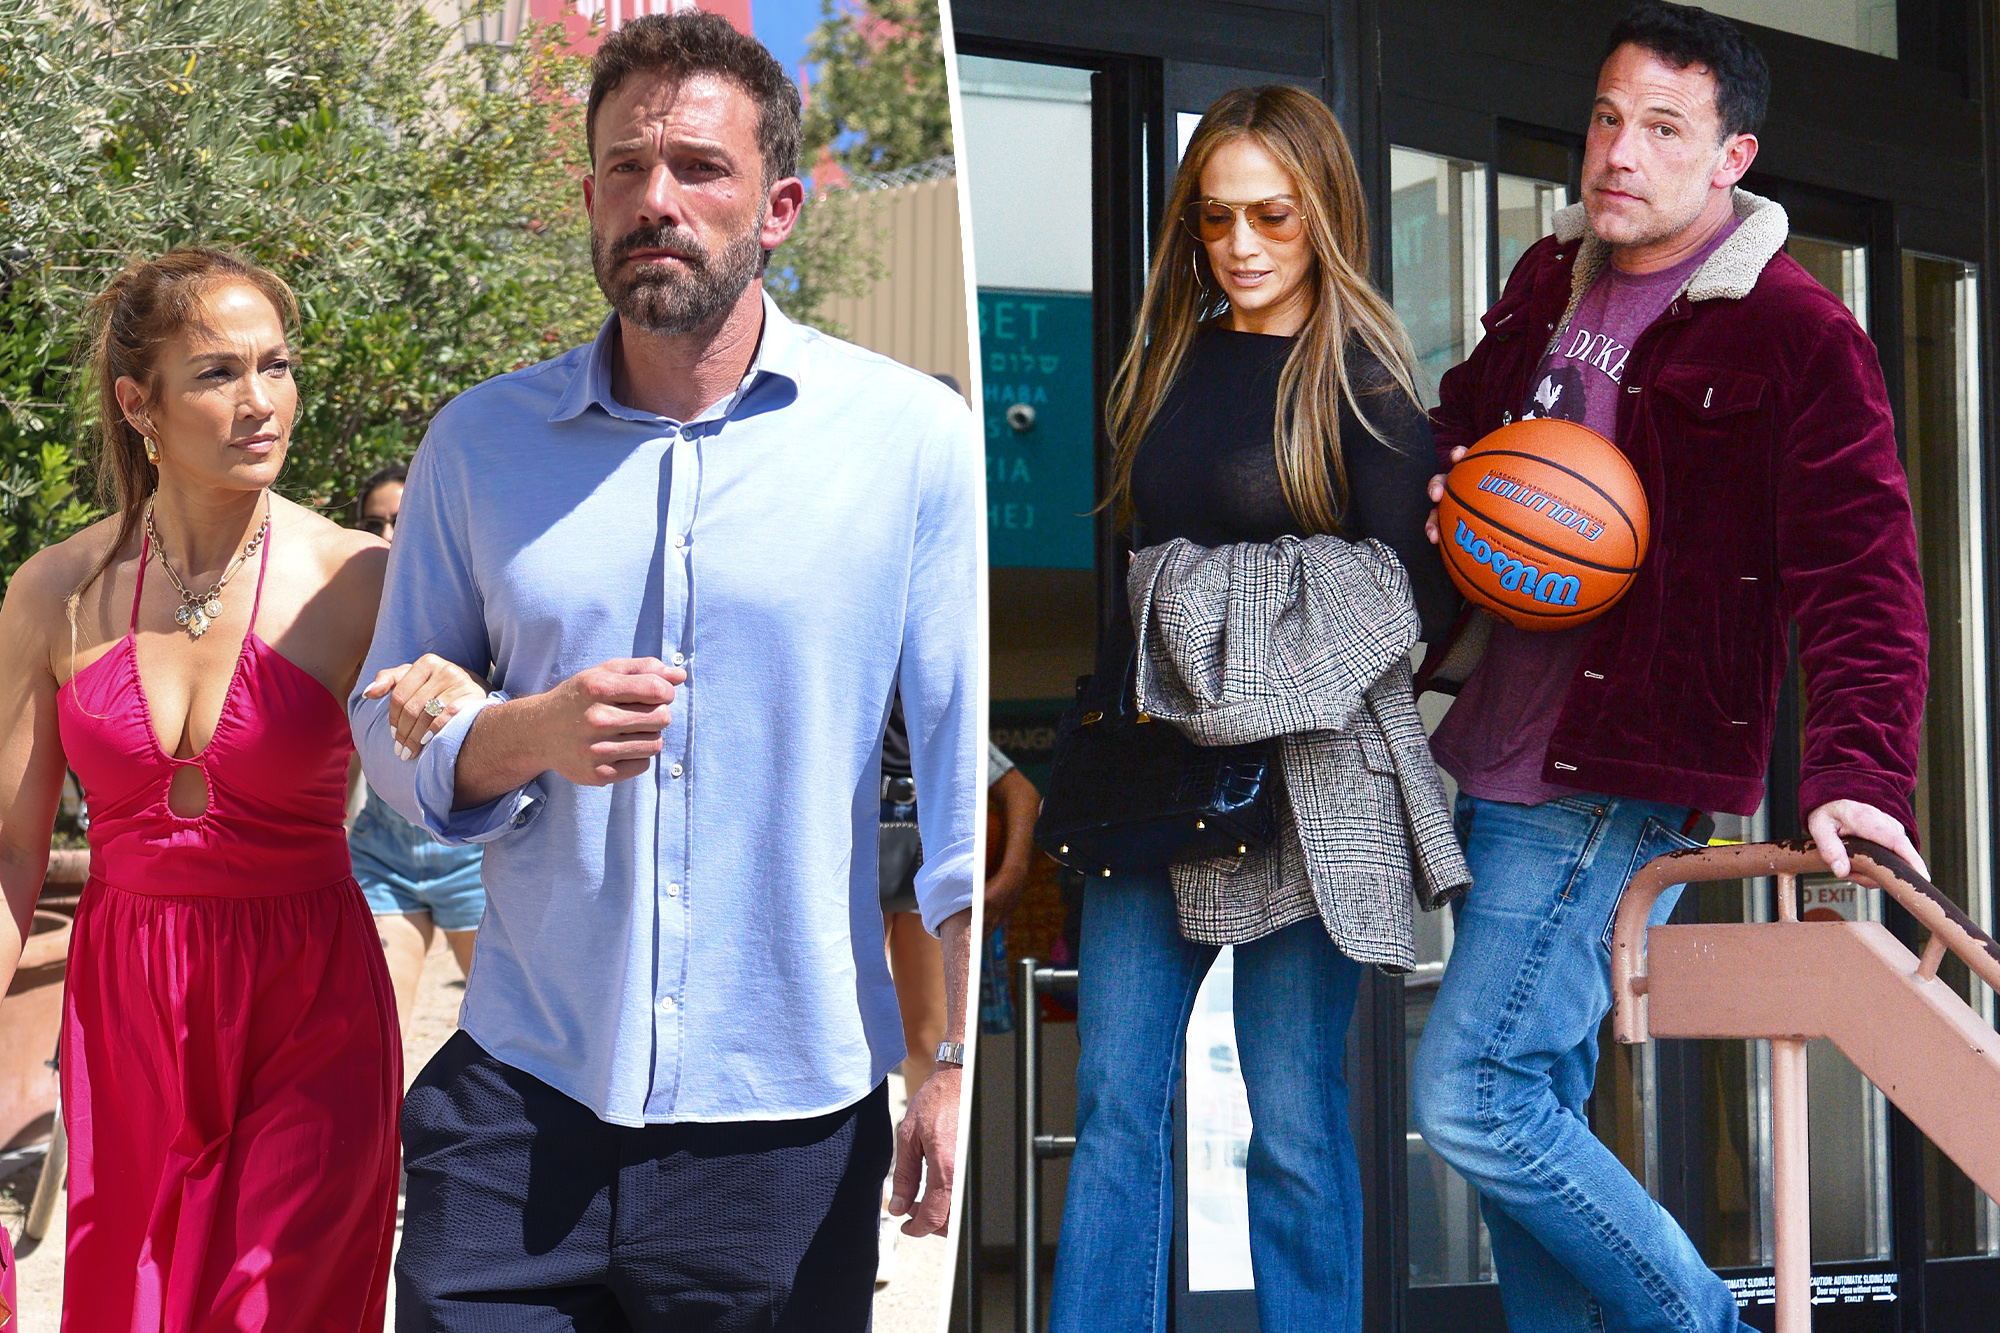 JLo and Ben Affleck: Is Love in the Air Again or Just a Summer Fling?